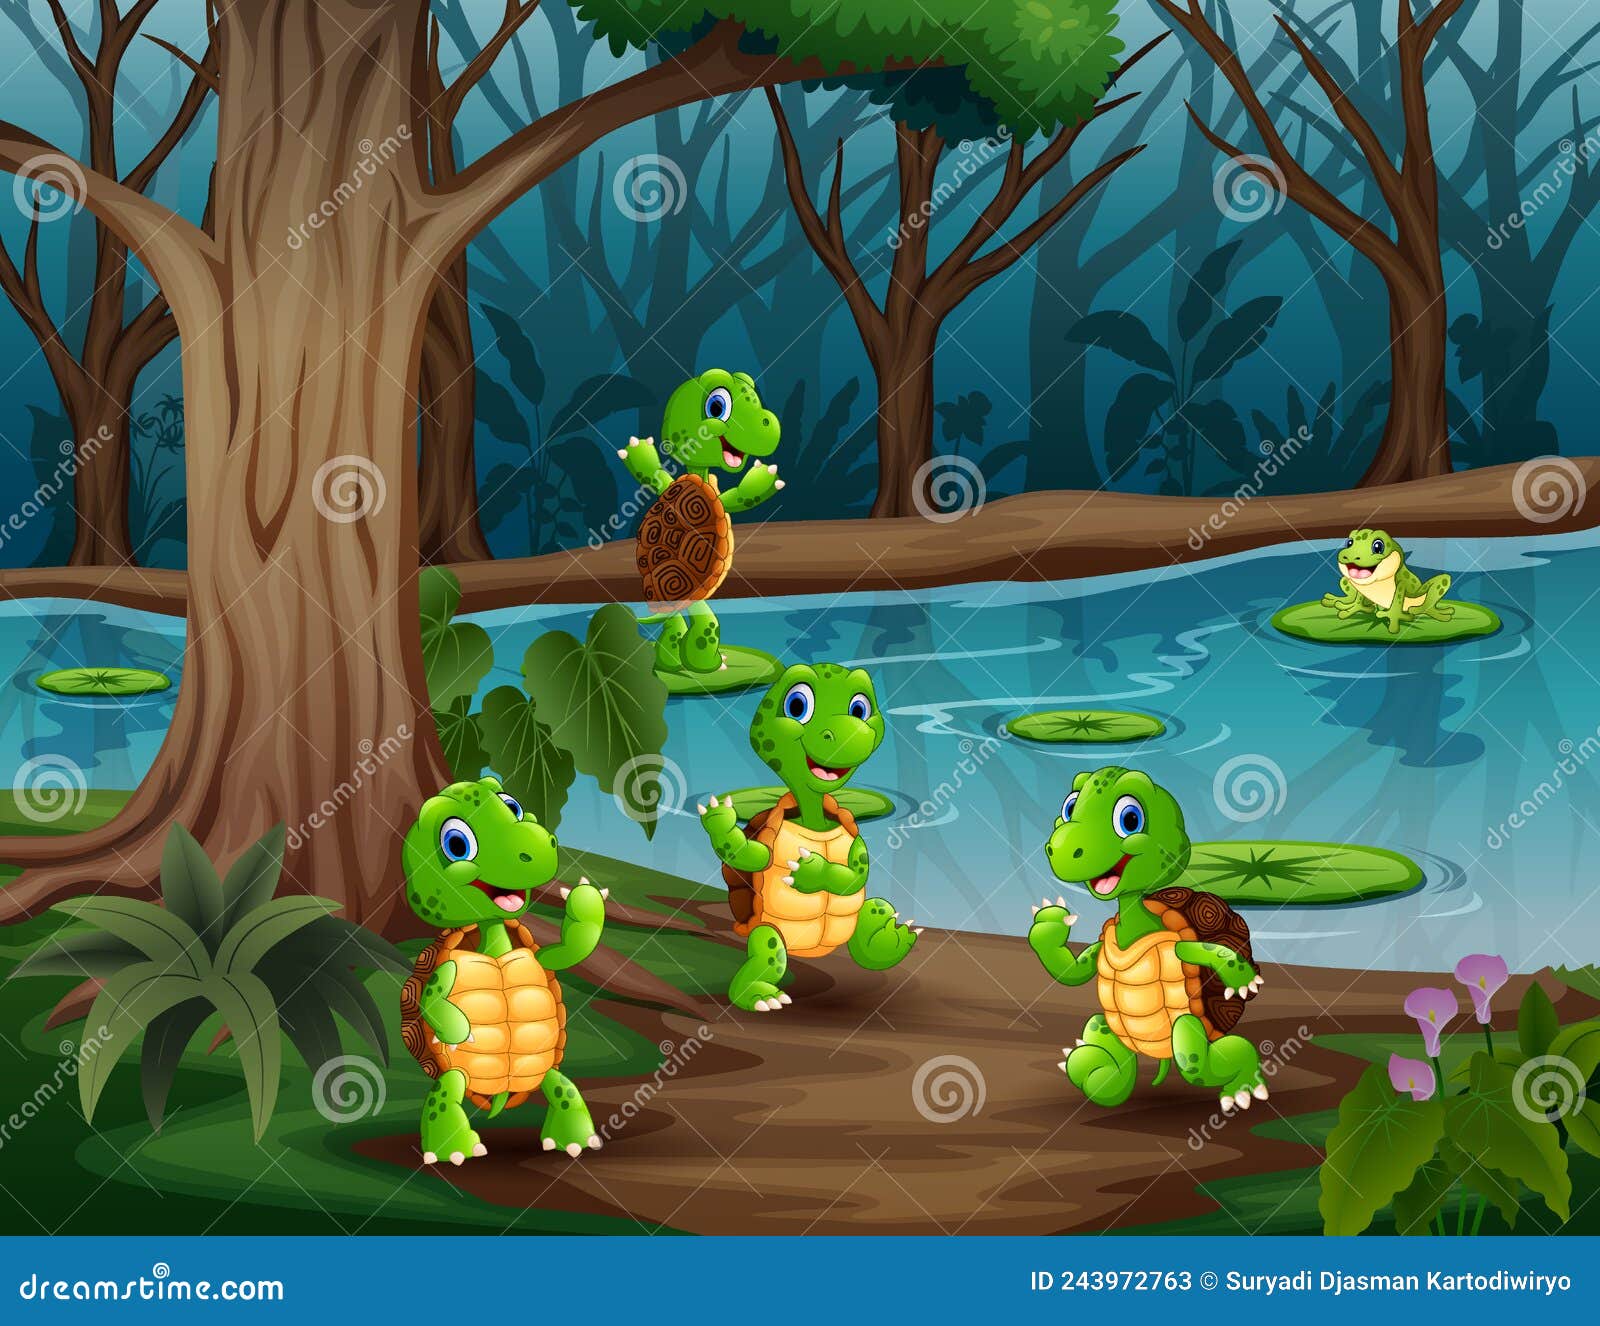 Cute cartoon turtles and frogs playing in the river illustration